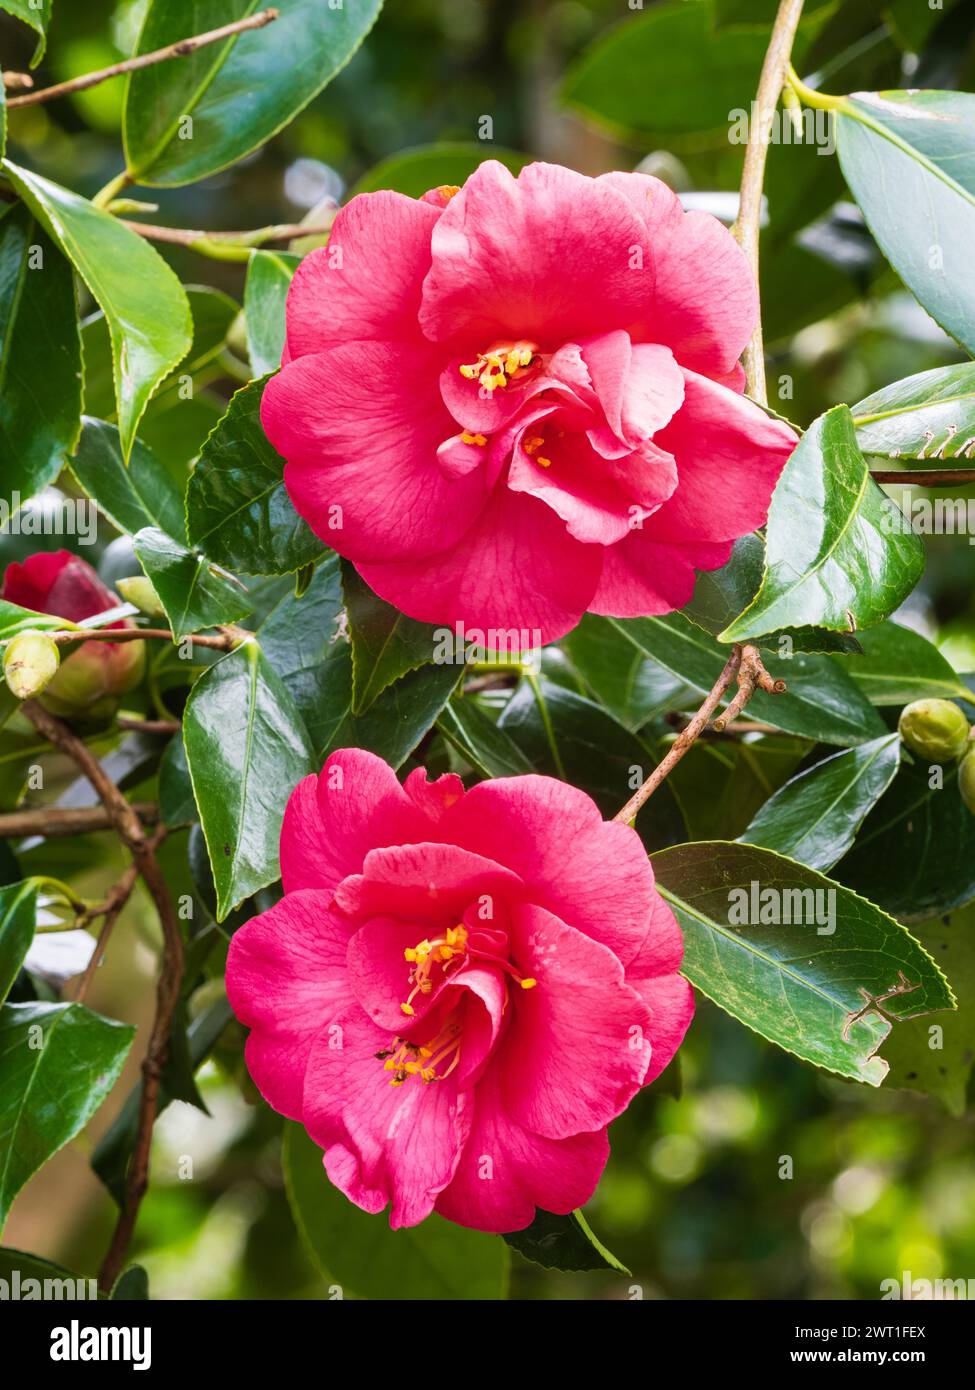 Late winter to early spring flowers of the hardy evergreen shrub, Camellia japonica 'Elegans' Stock Photo